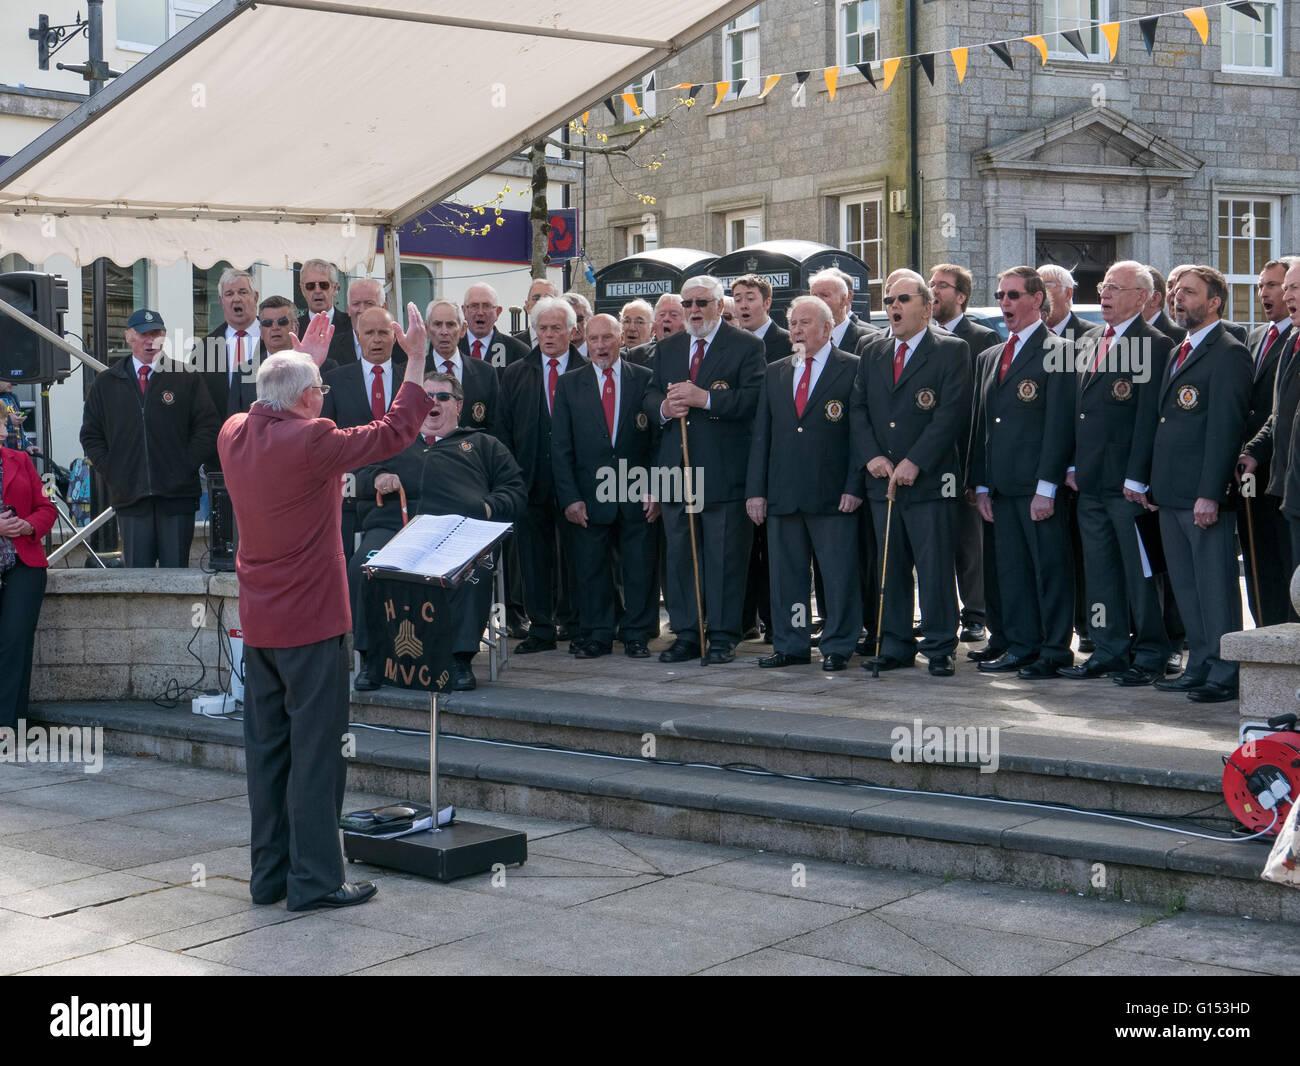 Holman Climax Cornish male voice choir signing during Trevithick day in Camborne, Cornwall England UK. Stock Photo